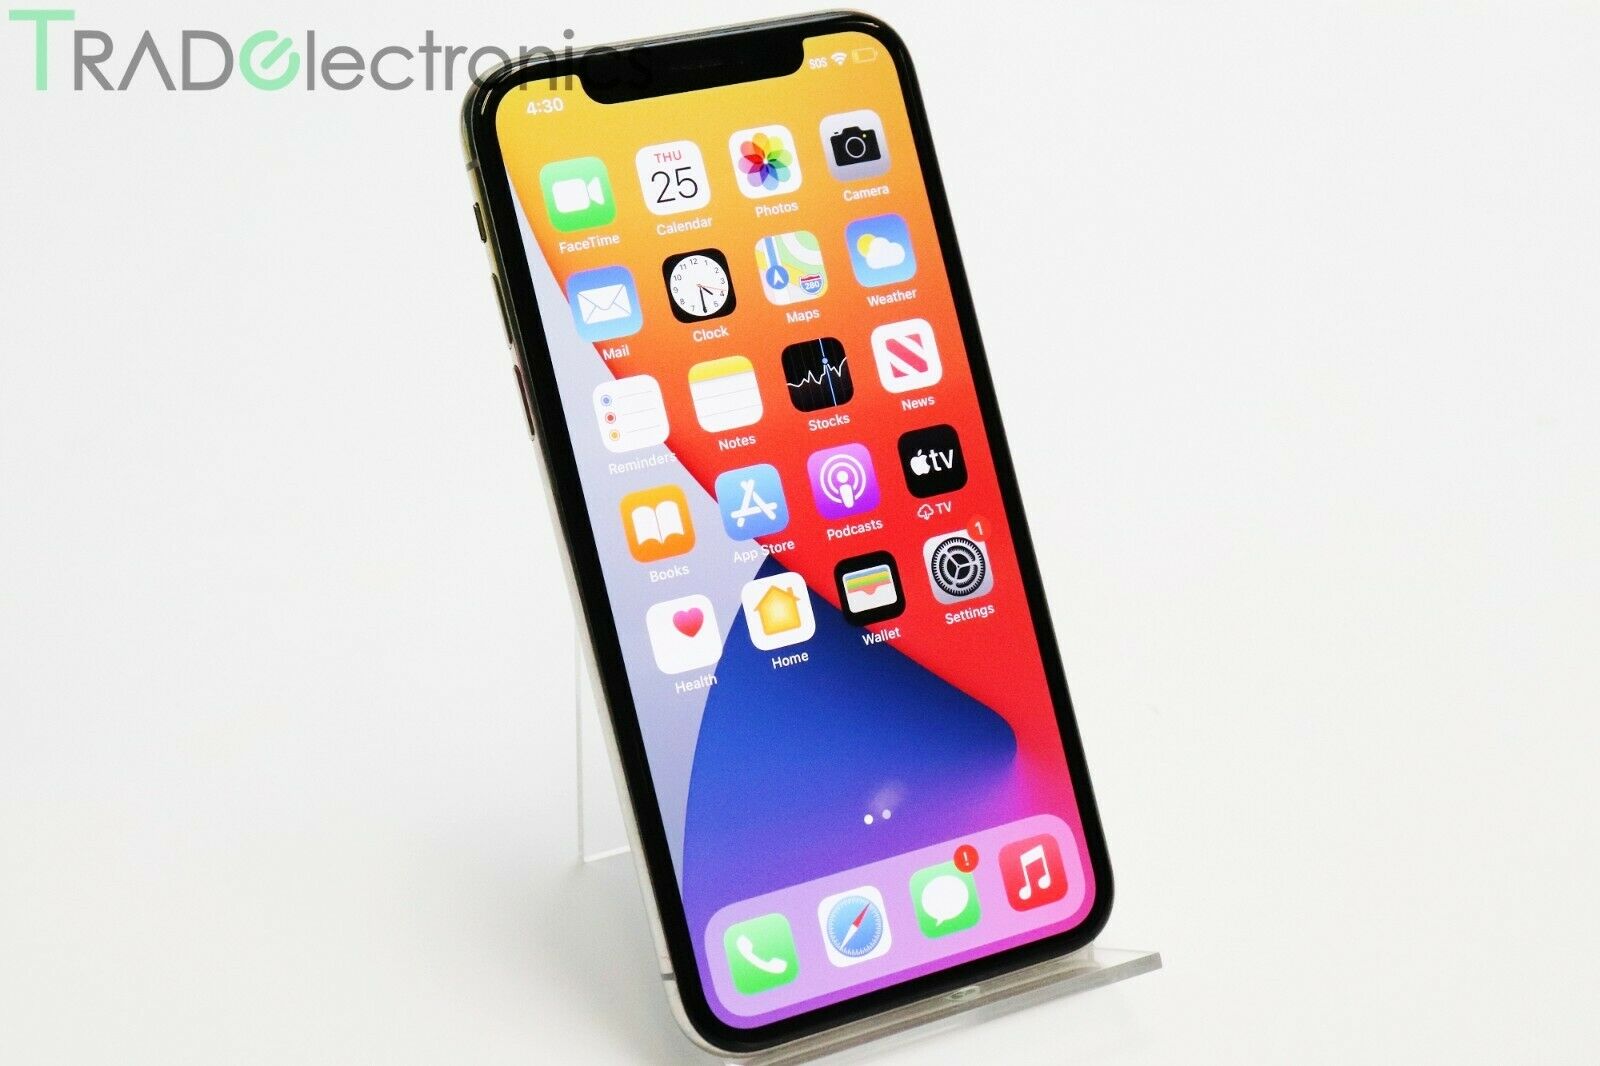 Apple iPhone X | 256GB | Buy Sell Preowned iPhones | Tradelectronics